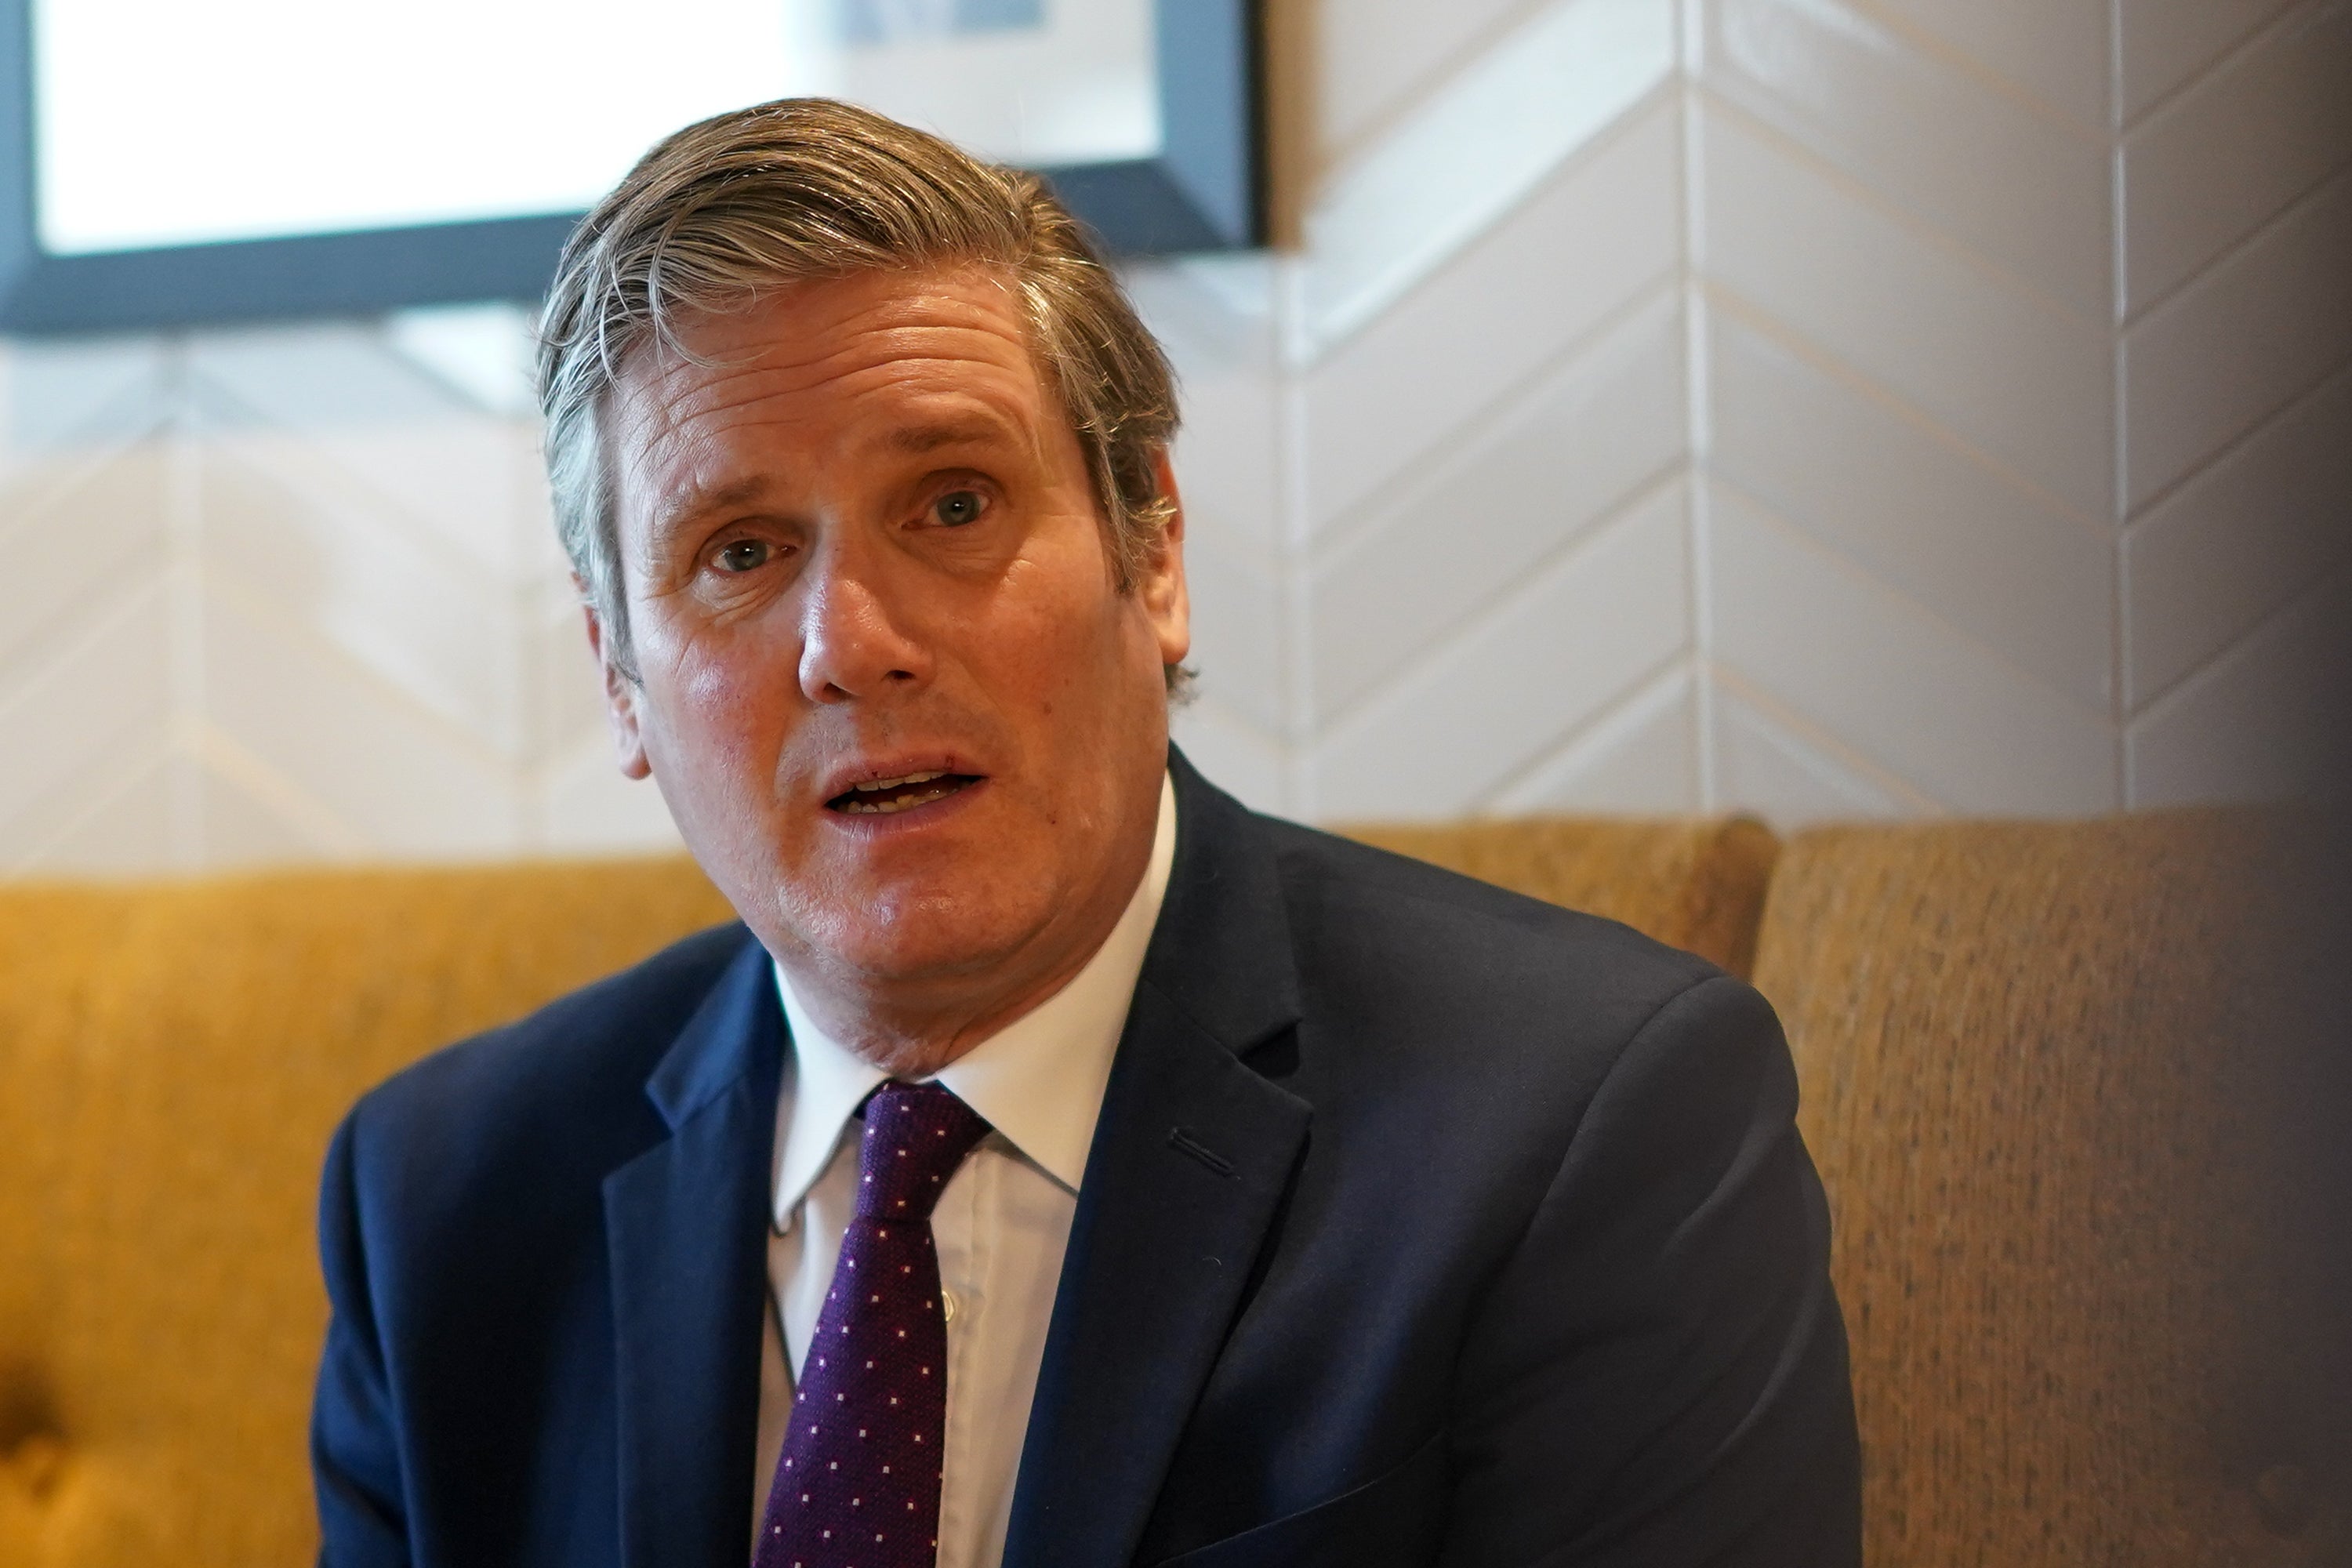 Labour Party leader Keir Starmer is yet to commit to PR